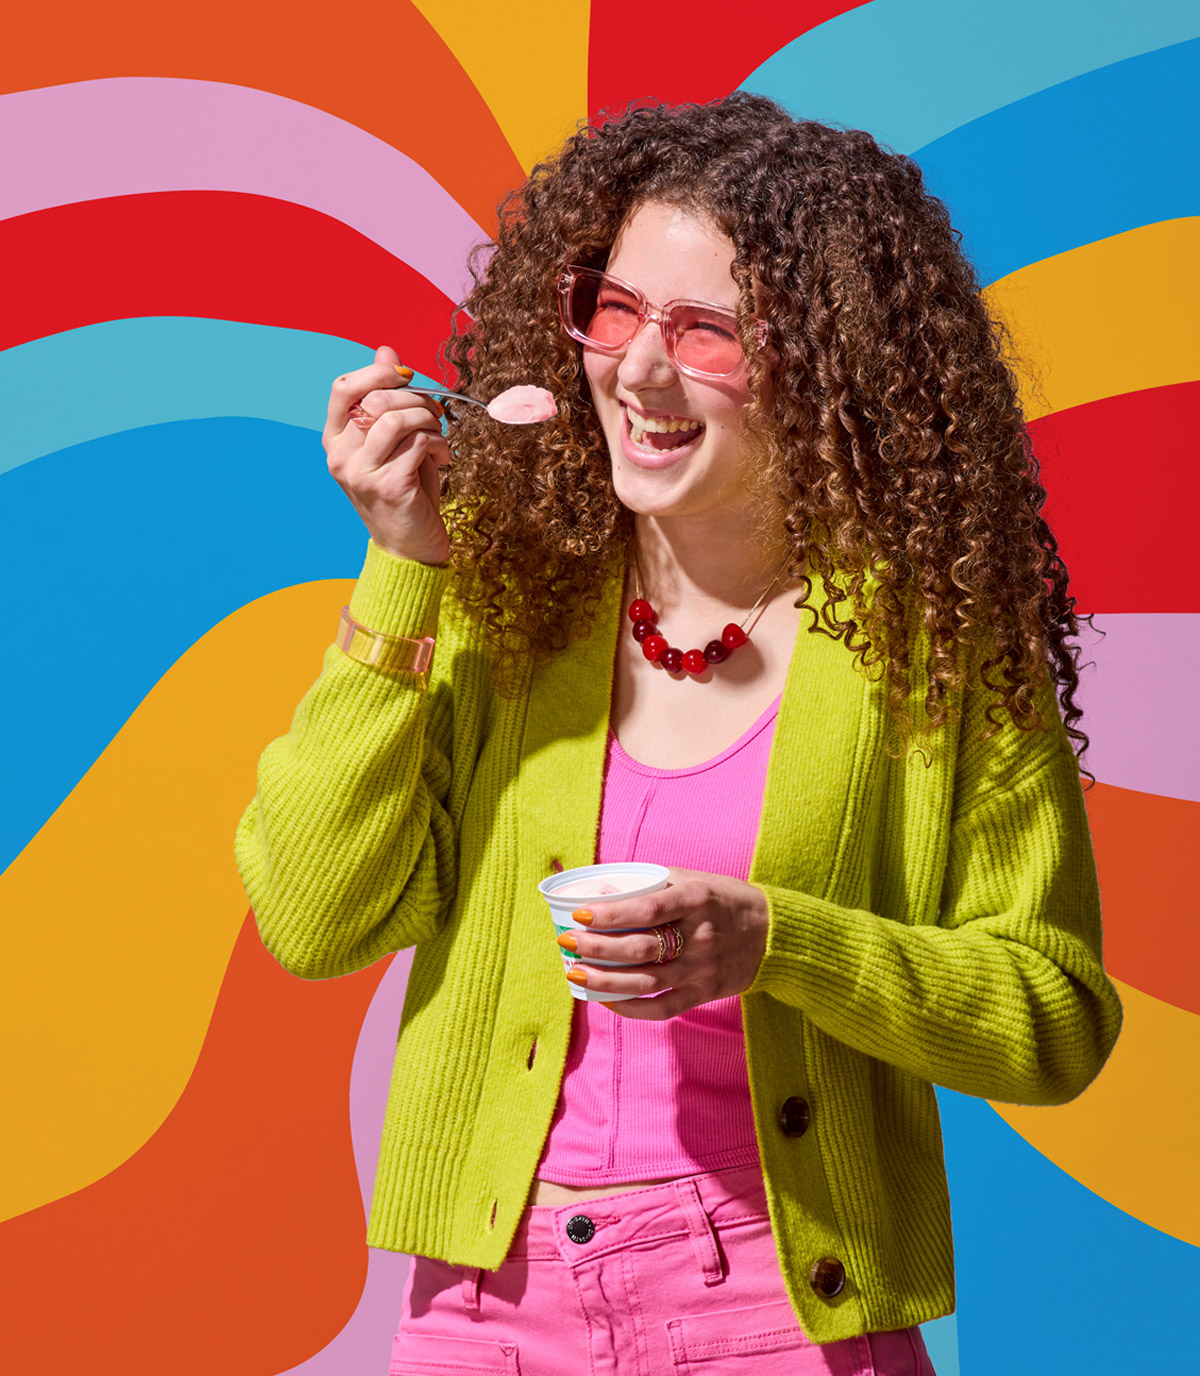 Woman with curly hair is eating kiwi strawberry LUIGI'S Real Italian Ice. Woman is wearing pink sunglasses, a pink outfit, and green sweater. Background is psychedelic rainbow swirls.